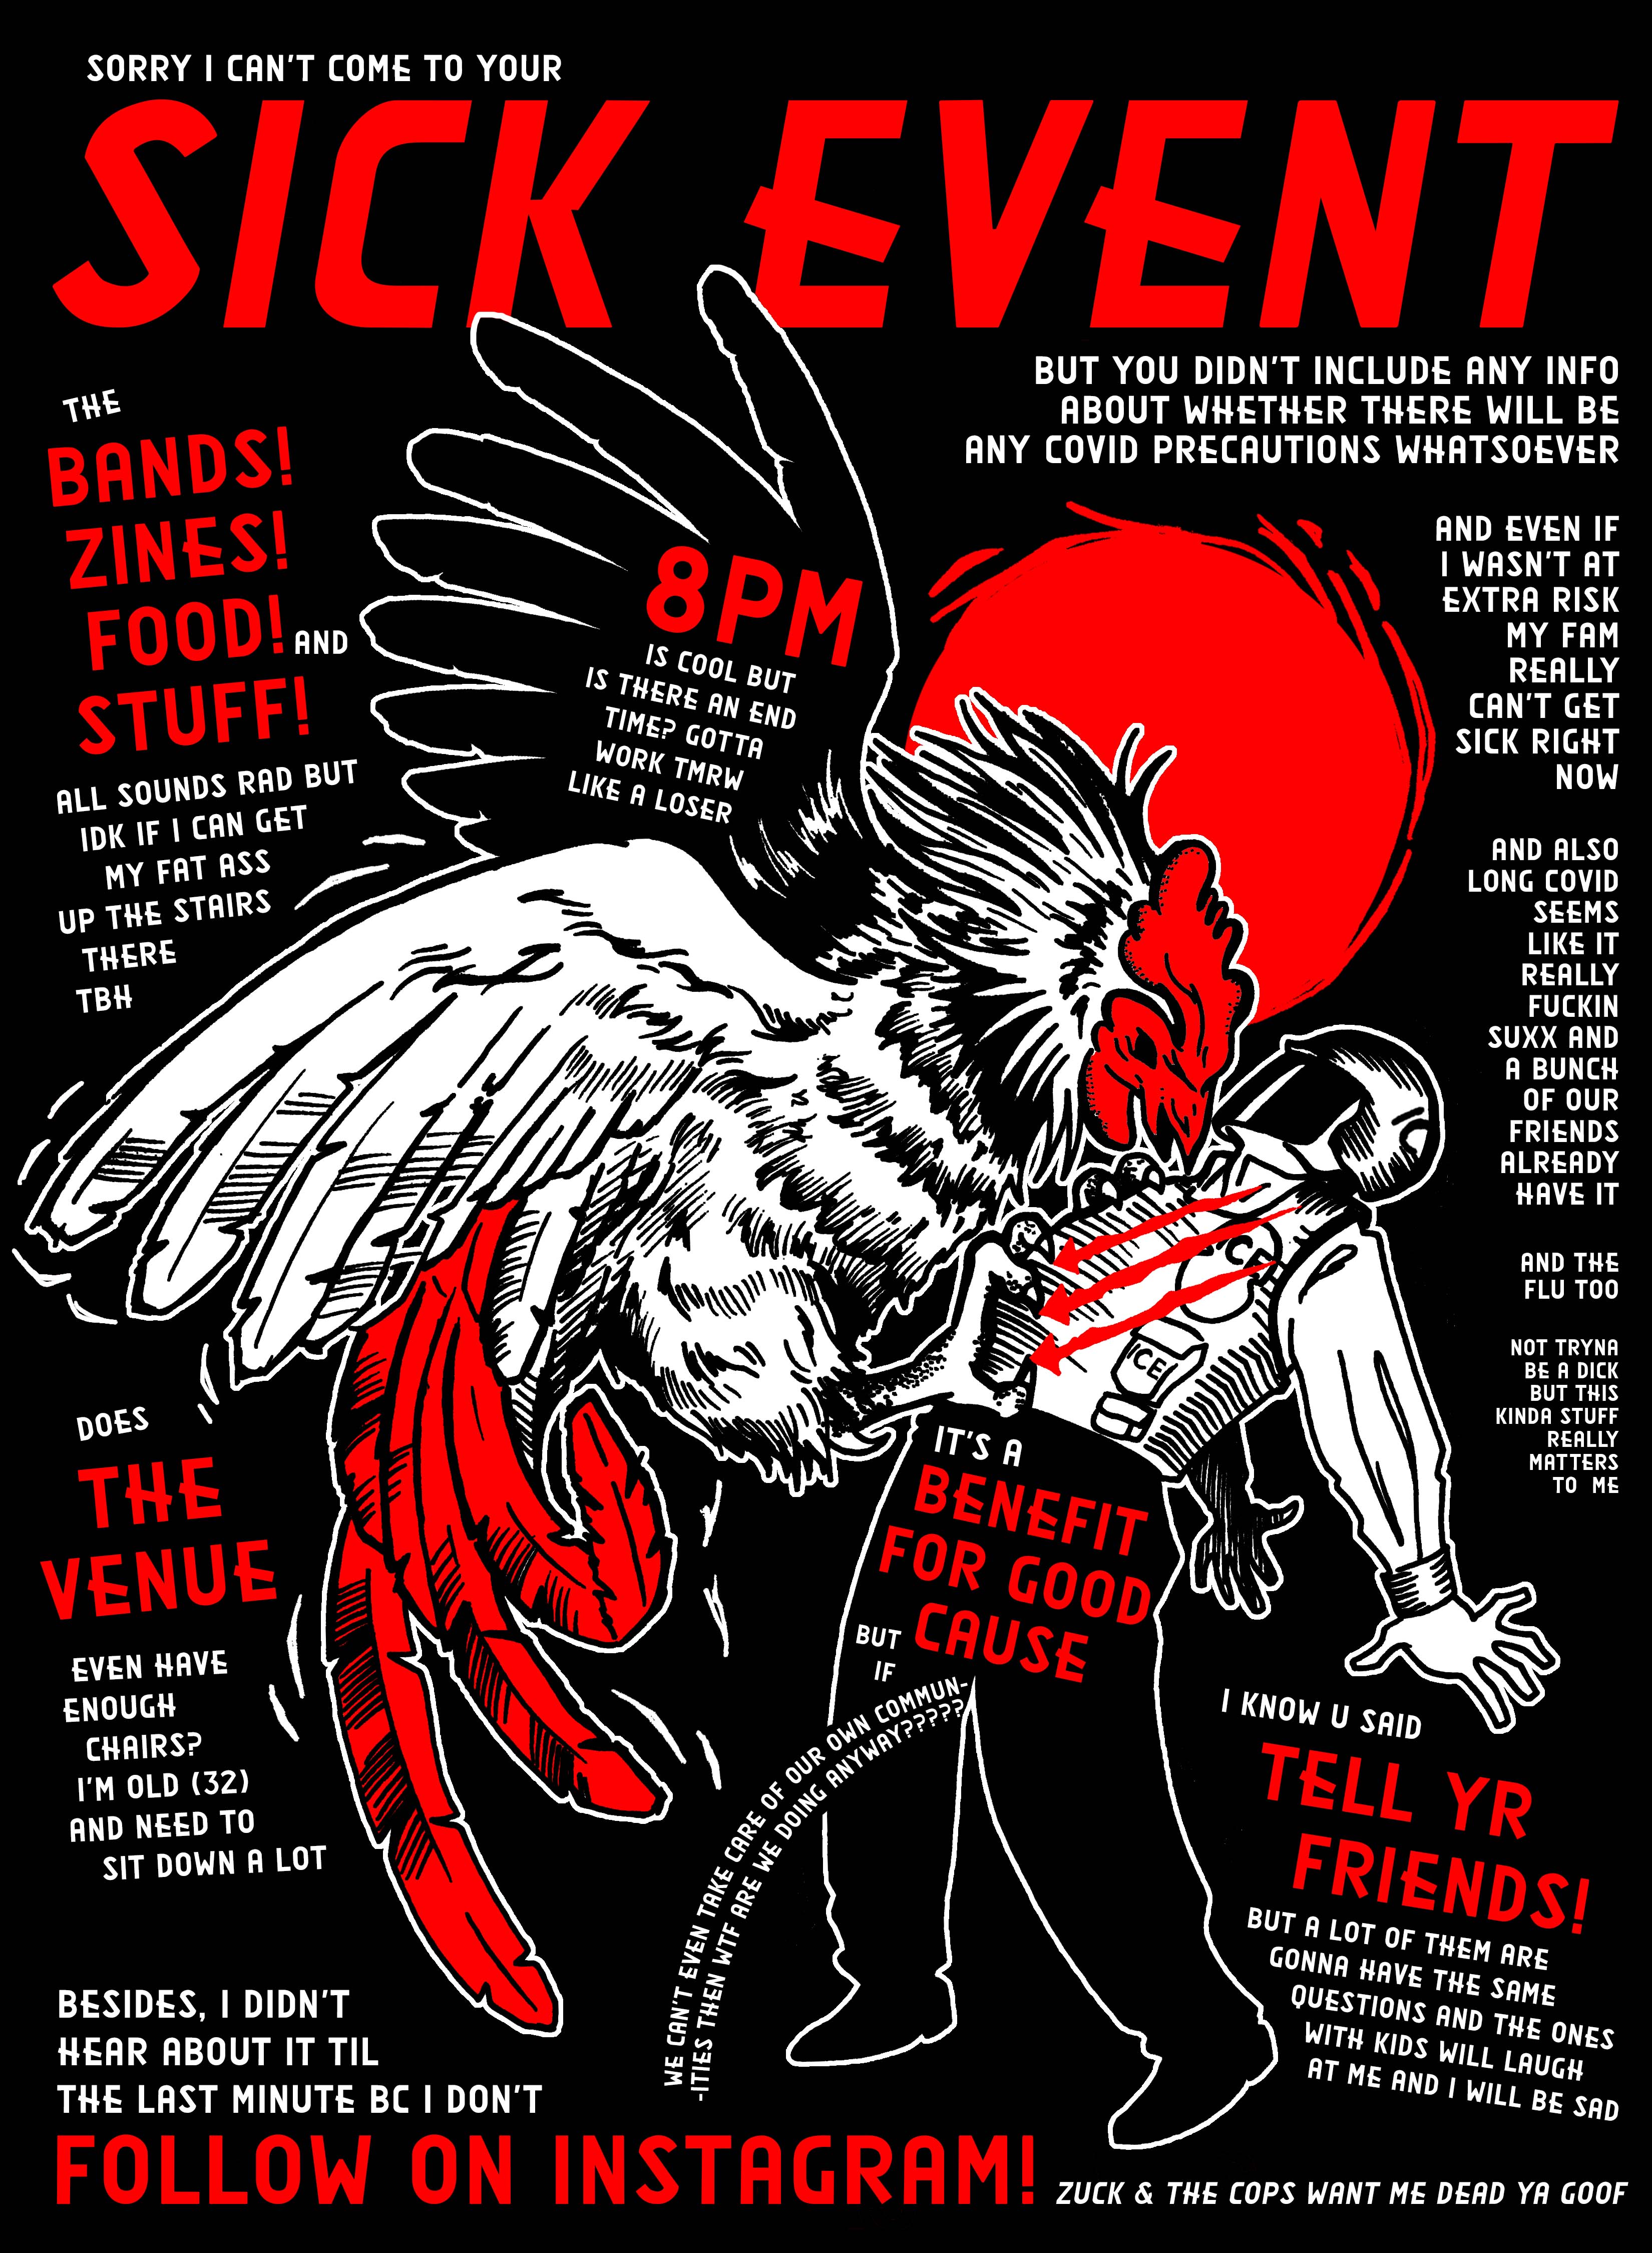 Flyer for an imaginary party called: Sick Event, right before the title it says: Sorry, I can’t come to your Sick Event. Bellow is shown an image of a rooster attacking a policeman who is bending backwards